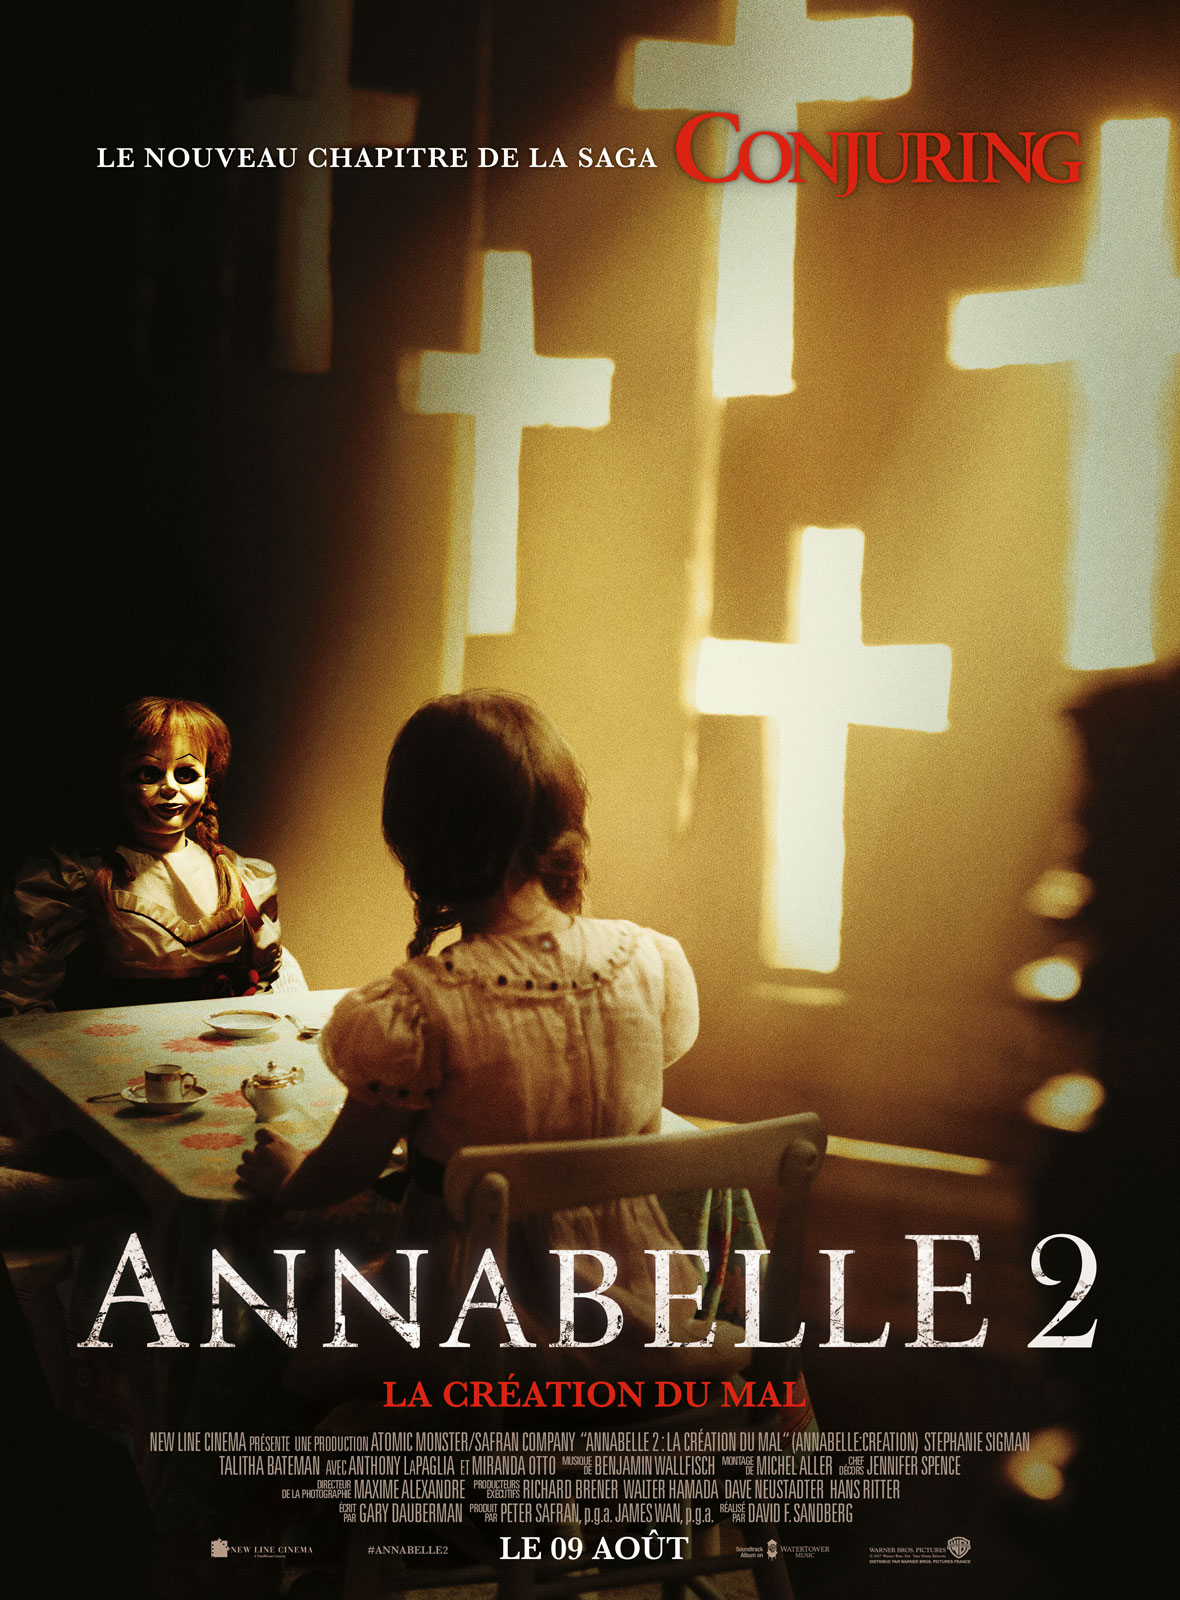 what is annabelle 2 about